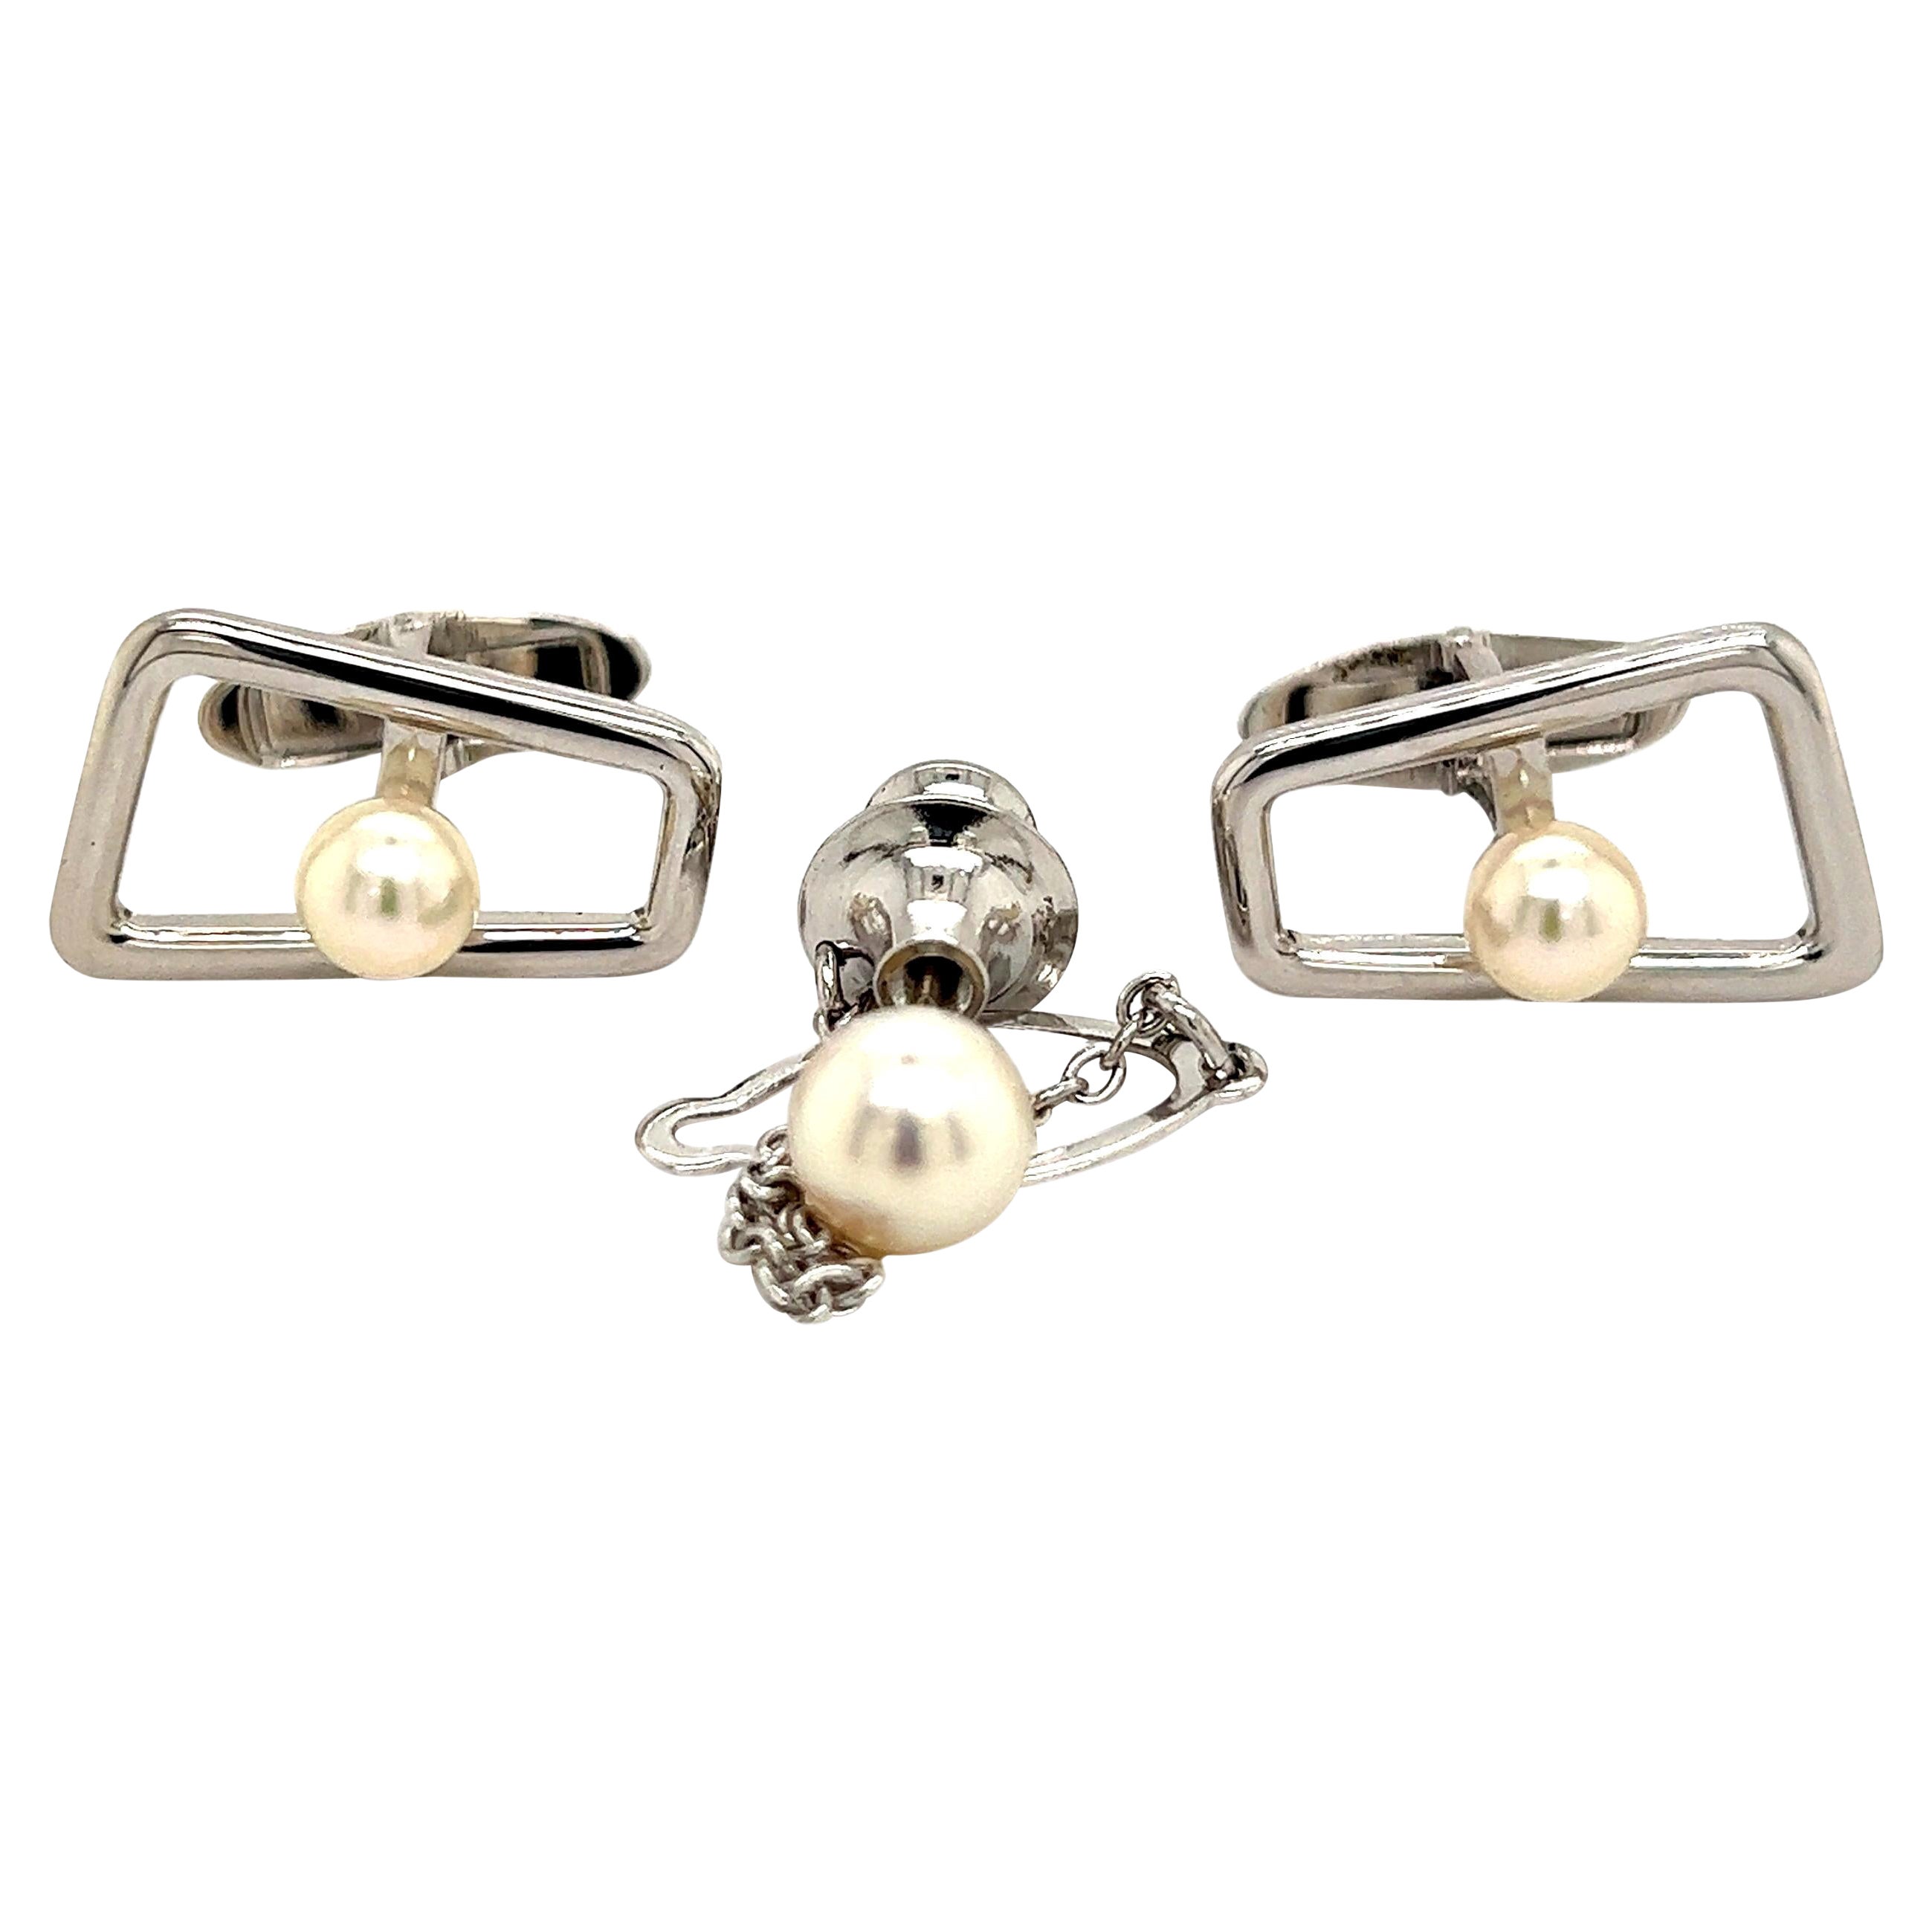 Mikimoto Estate Akoya Pearl Cufflinks and Tie Pin Sterling Silver For Sale